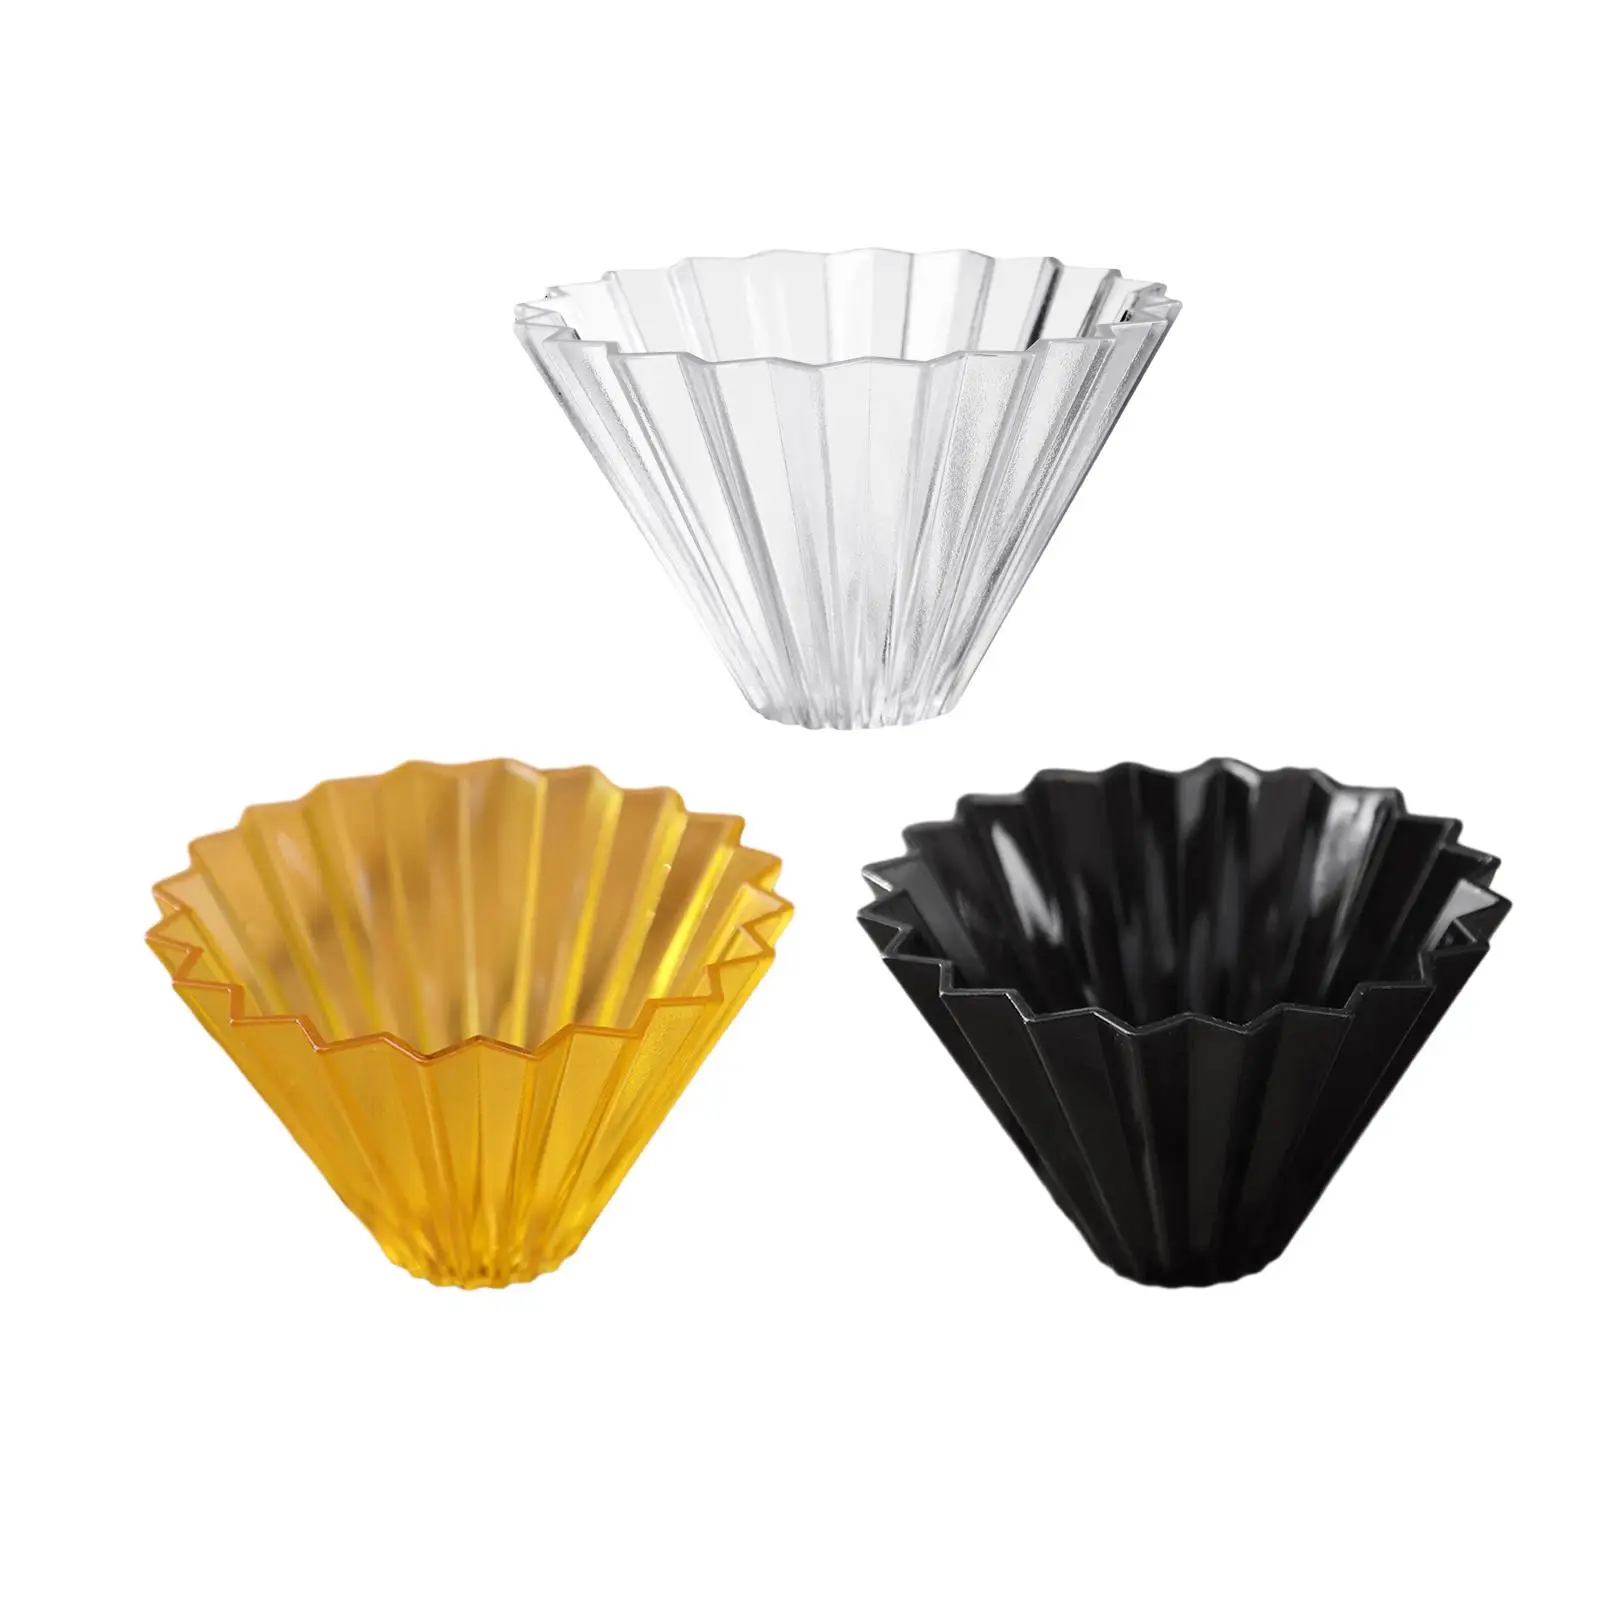 Pour over Coffee Filter Accessories Drip Coffee Filters Multipurpose Coffee Dripper for Camping Hiking Office Kitchen Restaurant